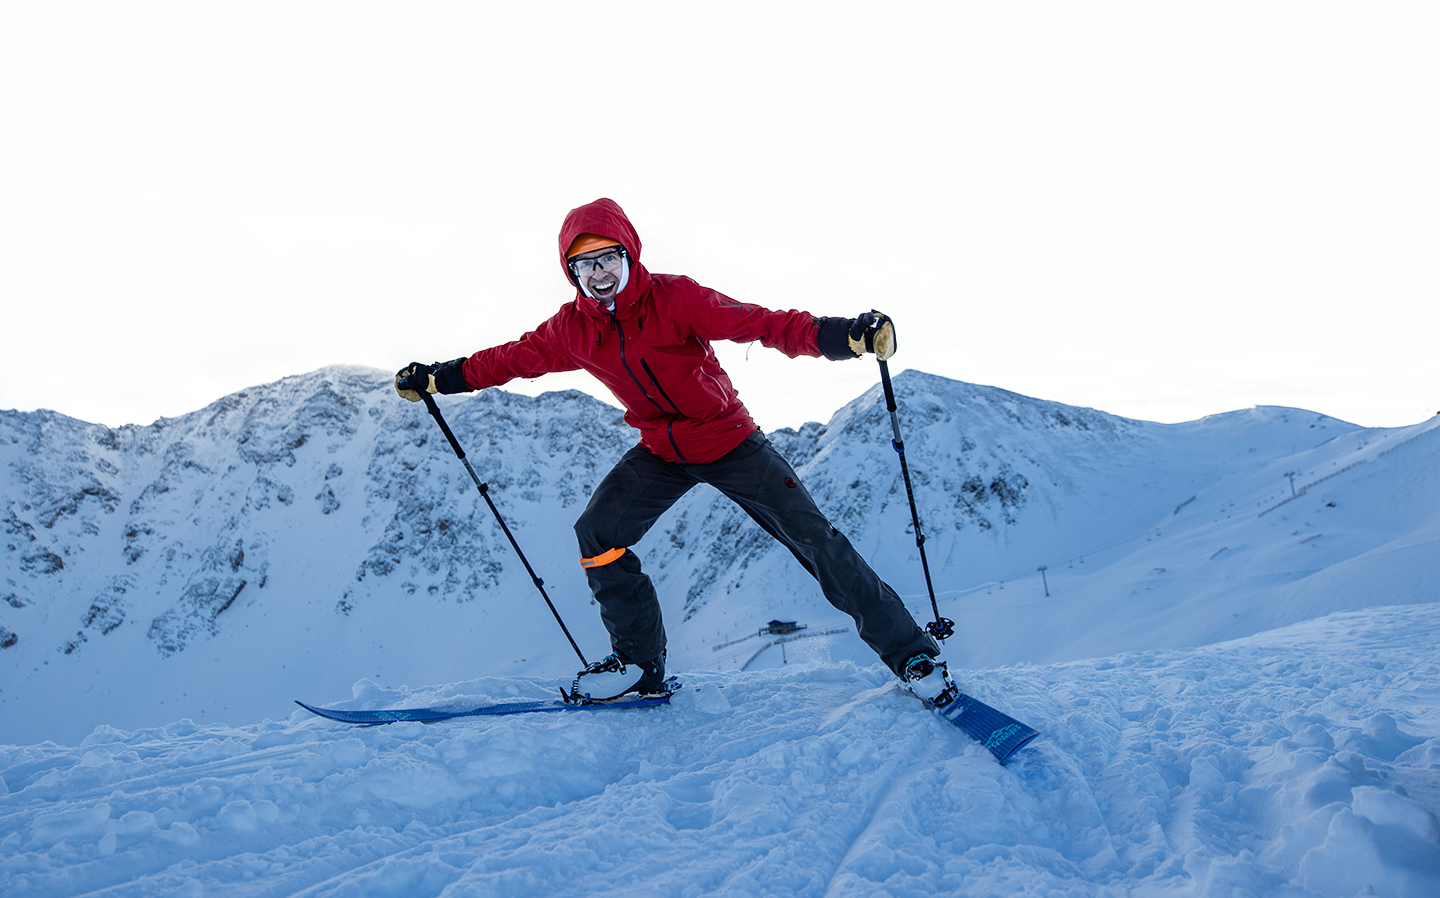 Smiling skier with mountains in the background